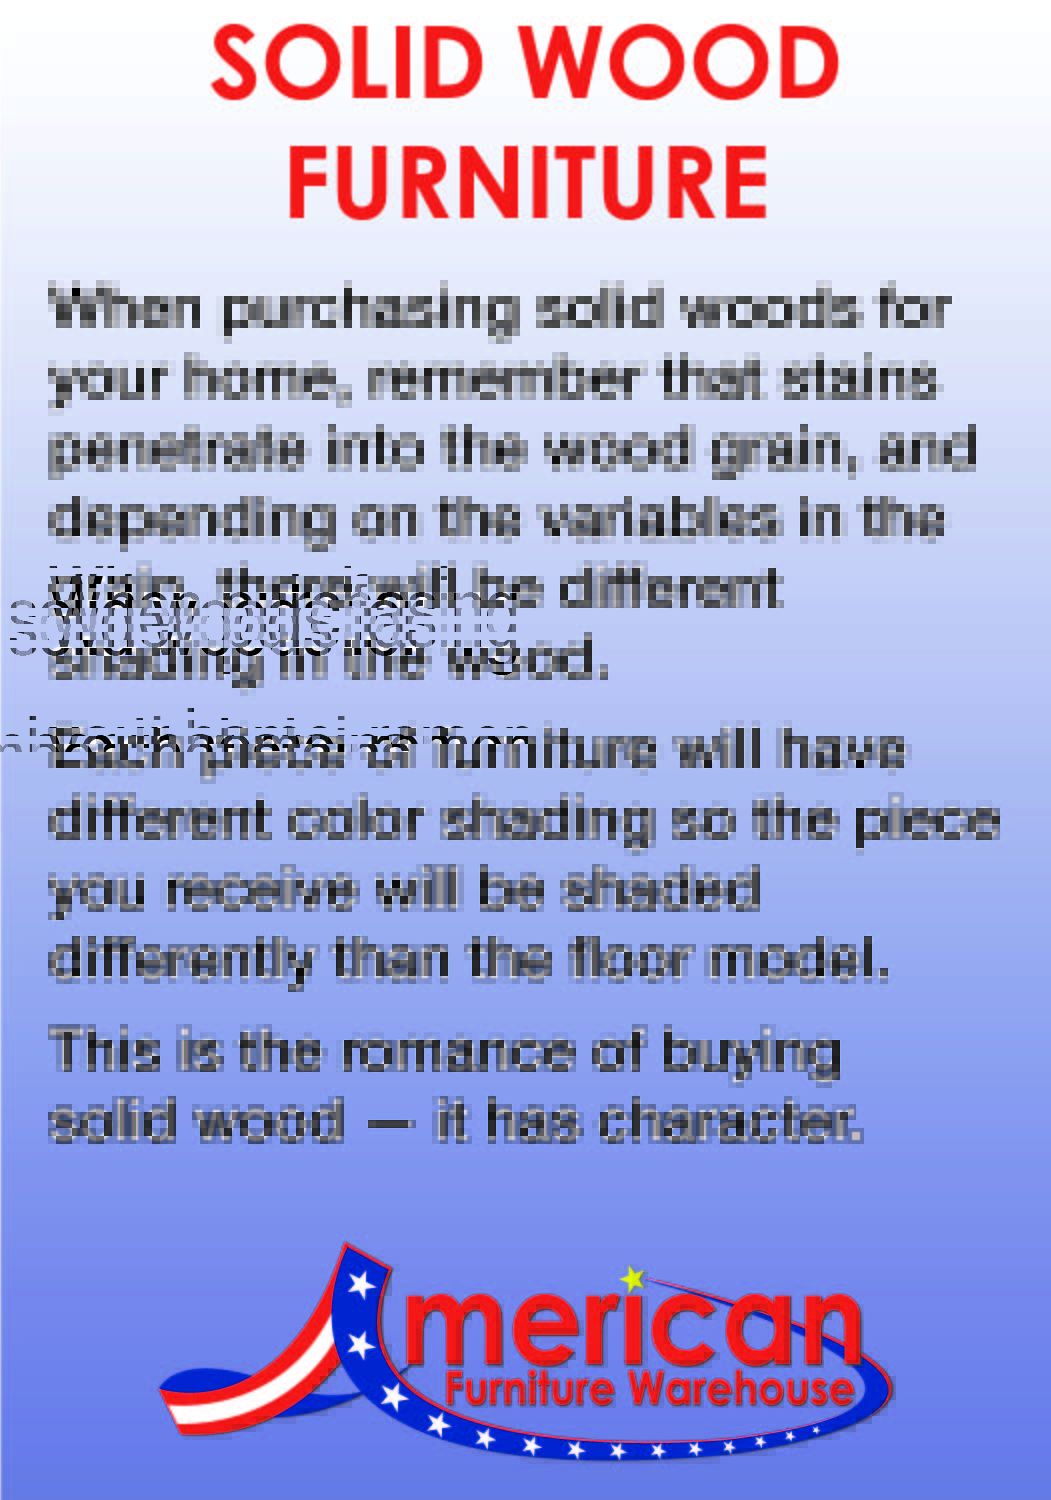 Solid Wood